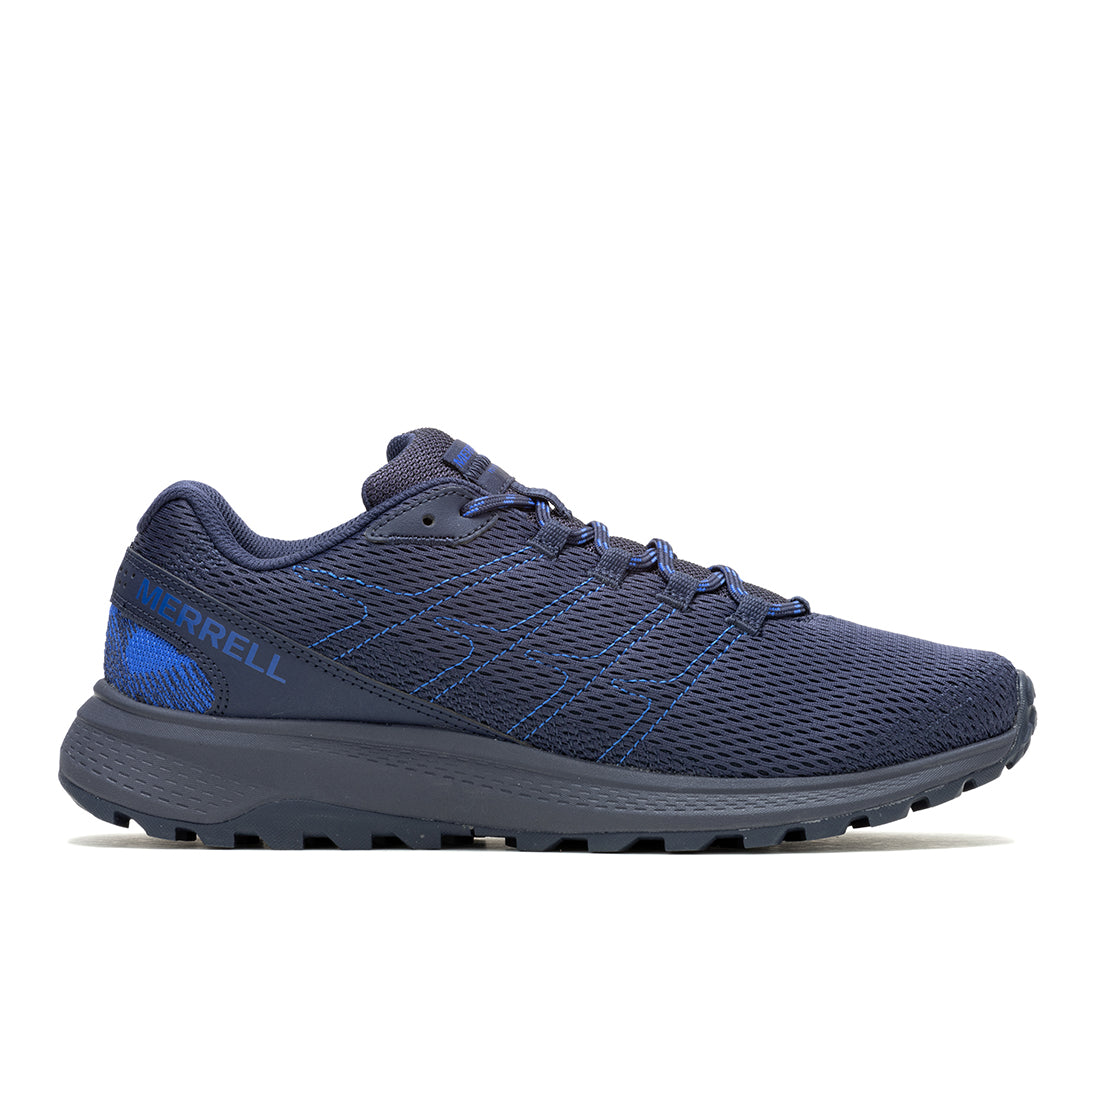 Fly Strike - Sea/Navy Mens Trail Running Shoes | Merrell Online Store